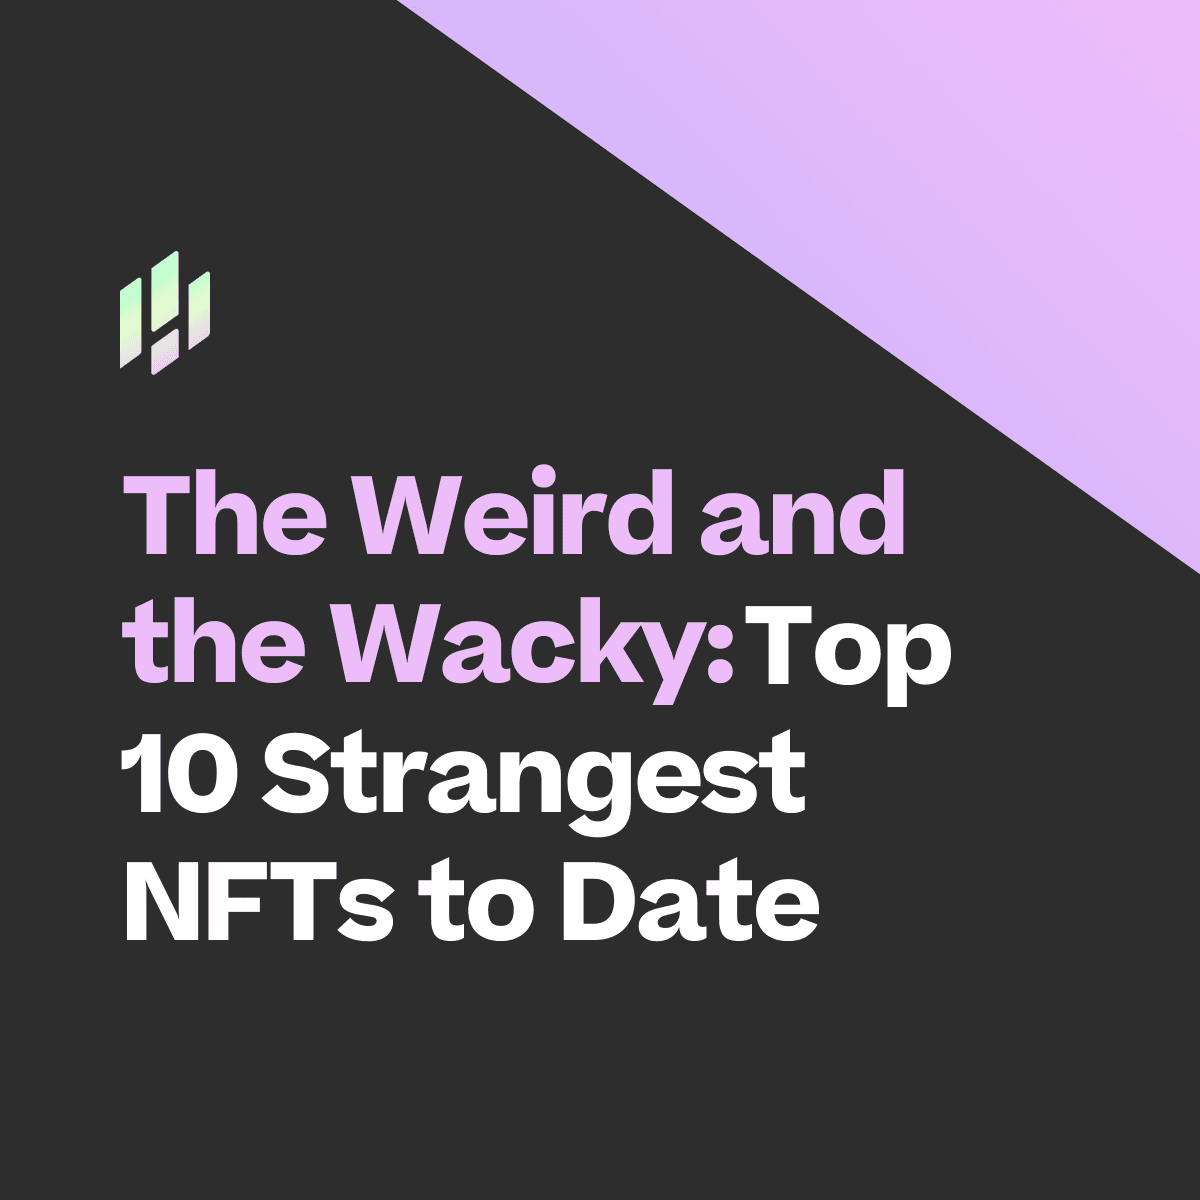 The Weird and The Wacky: Top 10 Strangest NFTs to Date